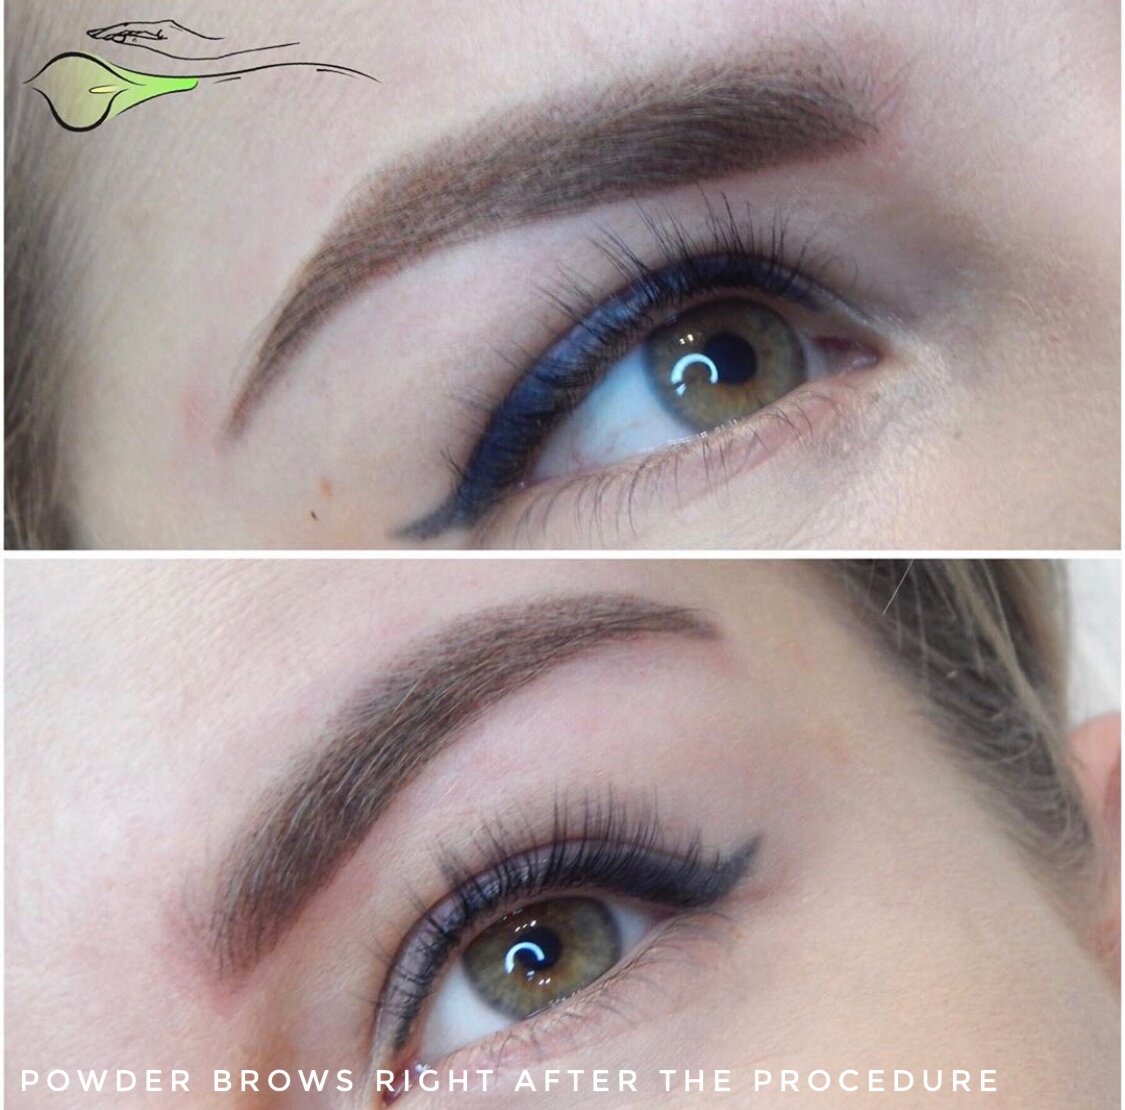 Powder Brows Healing Process Full Day by Day Overview  PMUHub